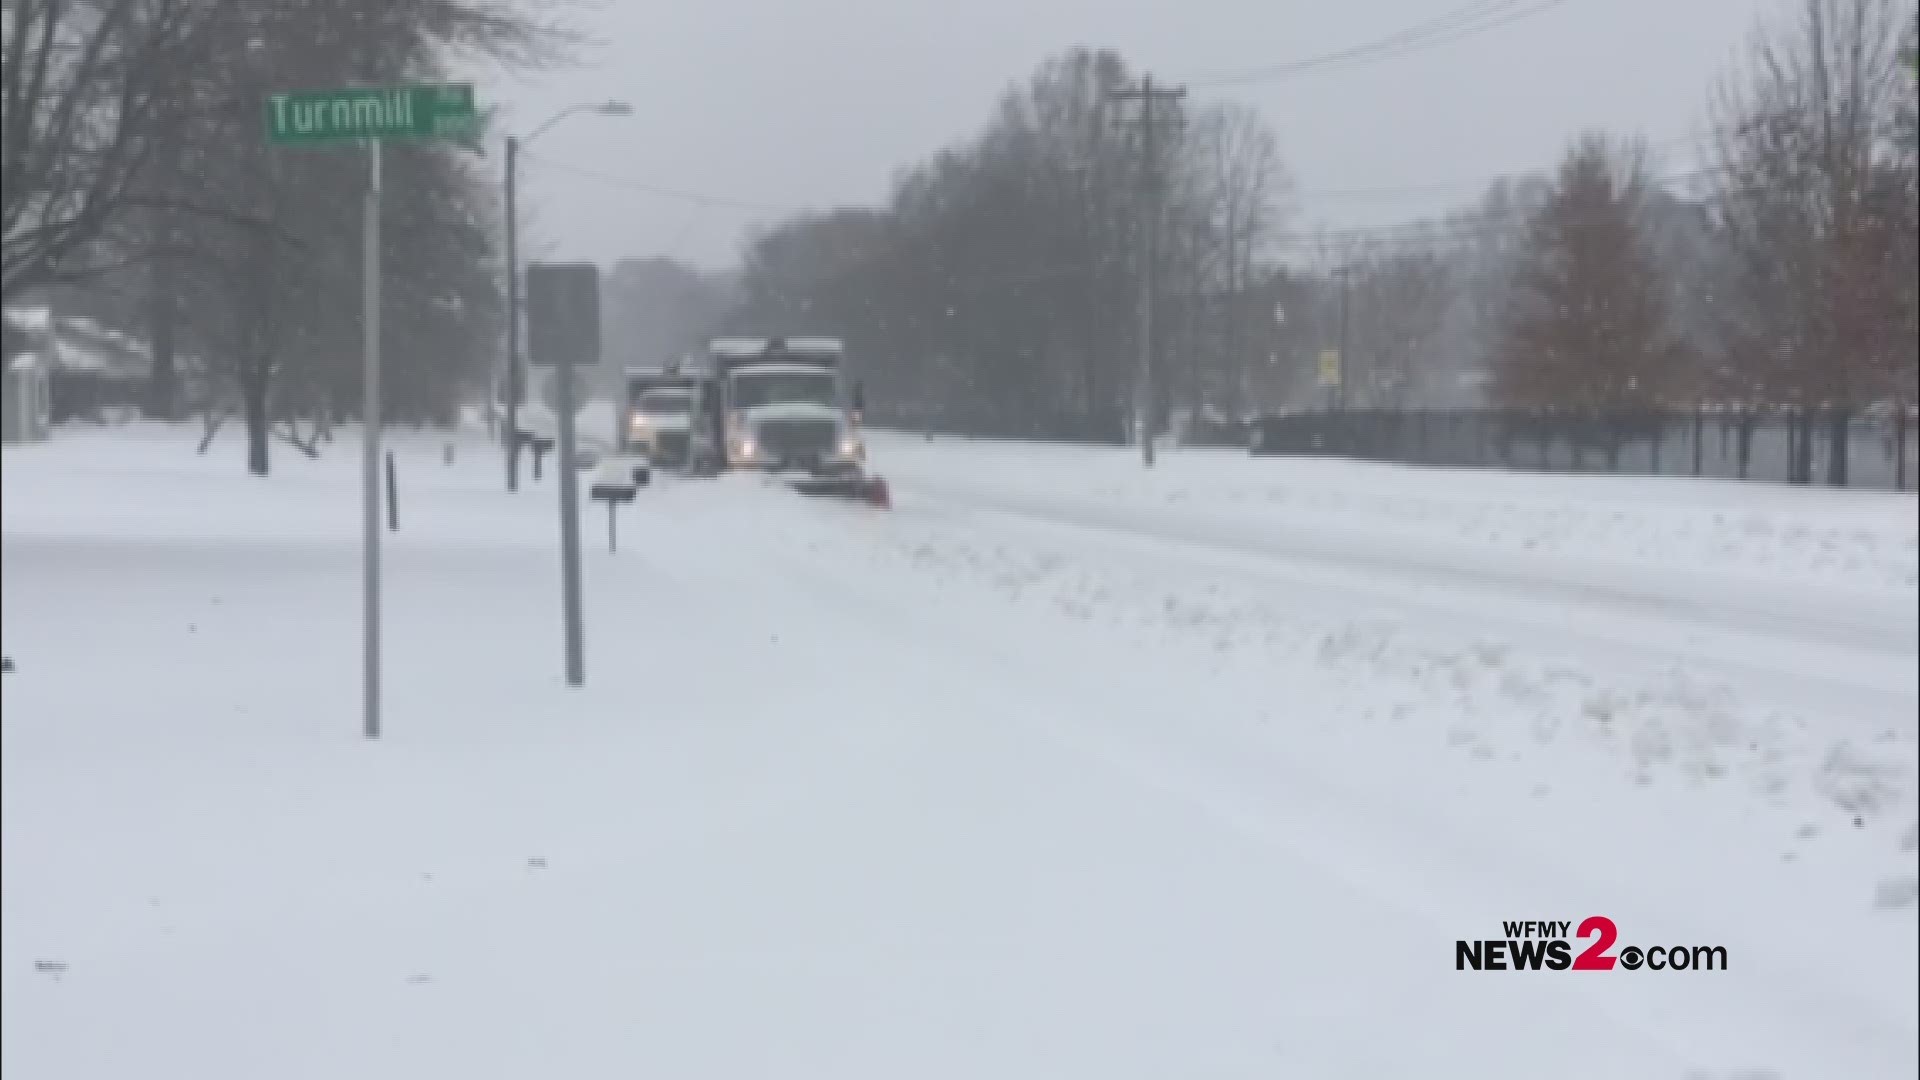 City of Greensboro snow plows out and about working to clear the snowy roads.